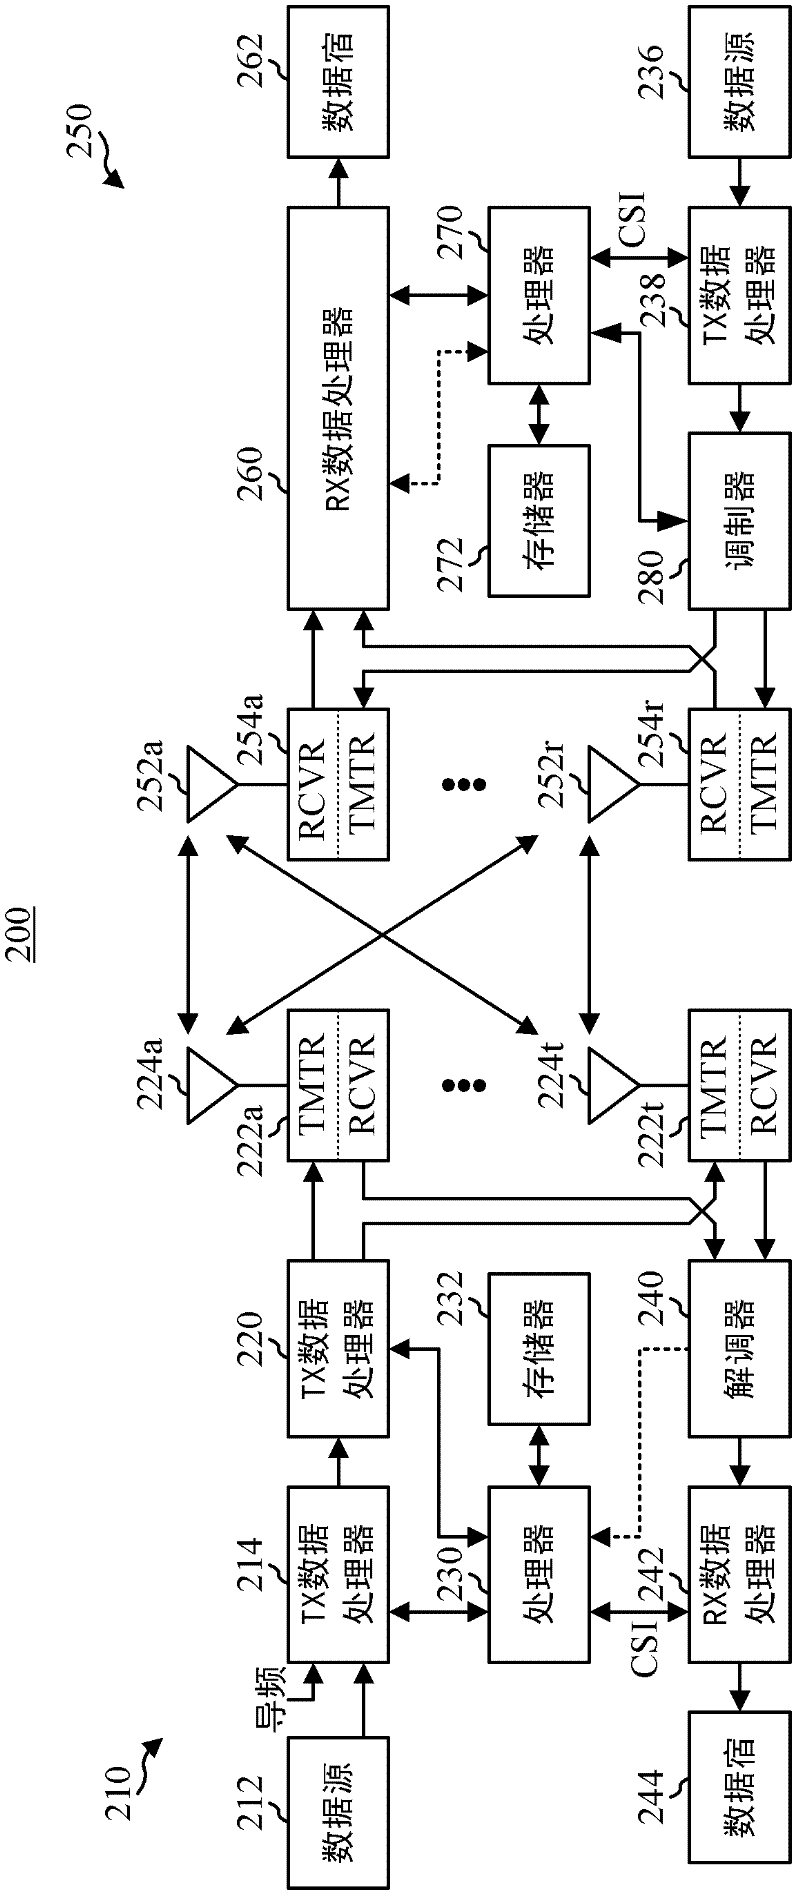 Scheduling algorithms for cooperative beamforming based on resource quality indication